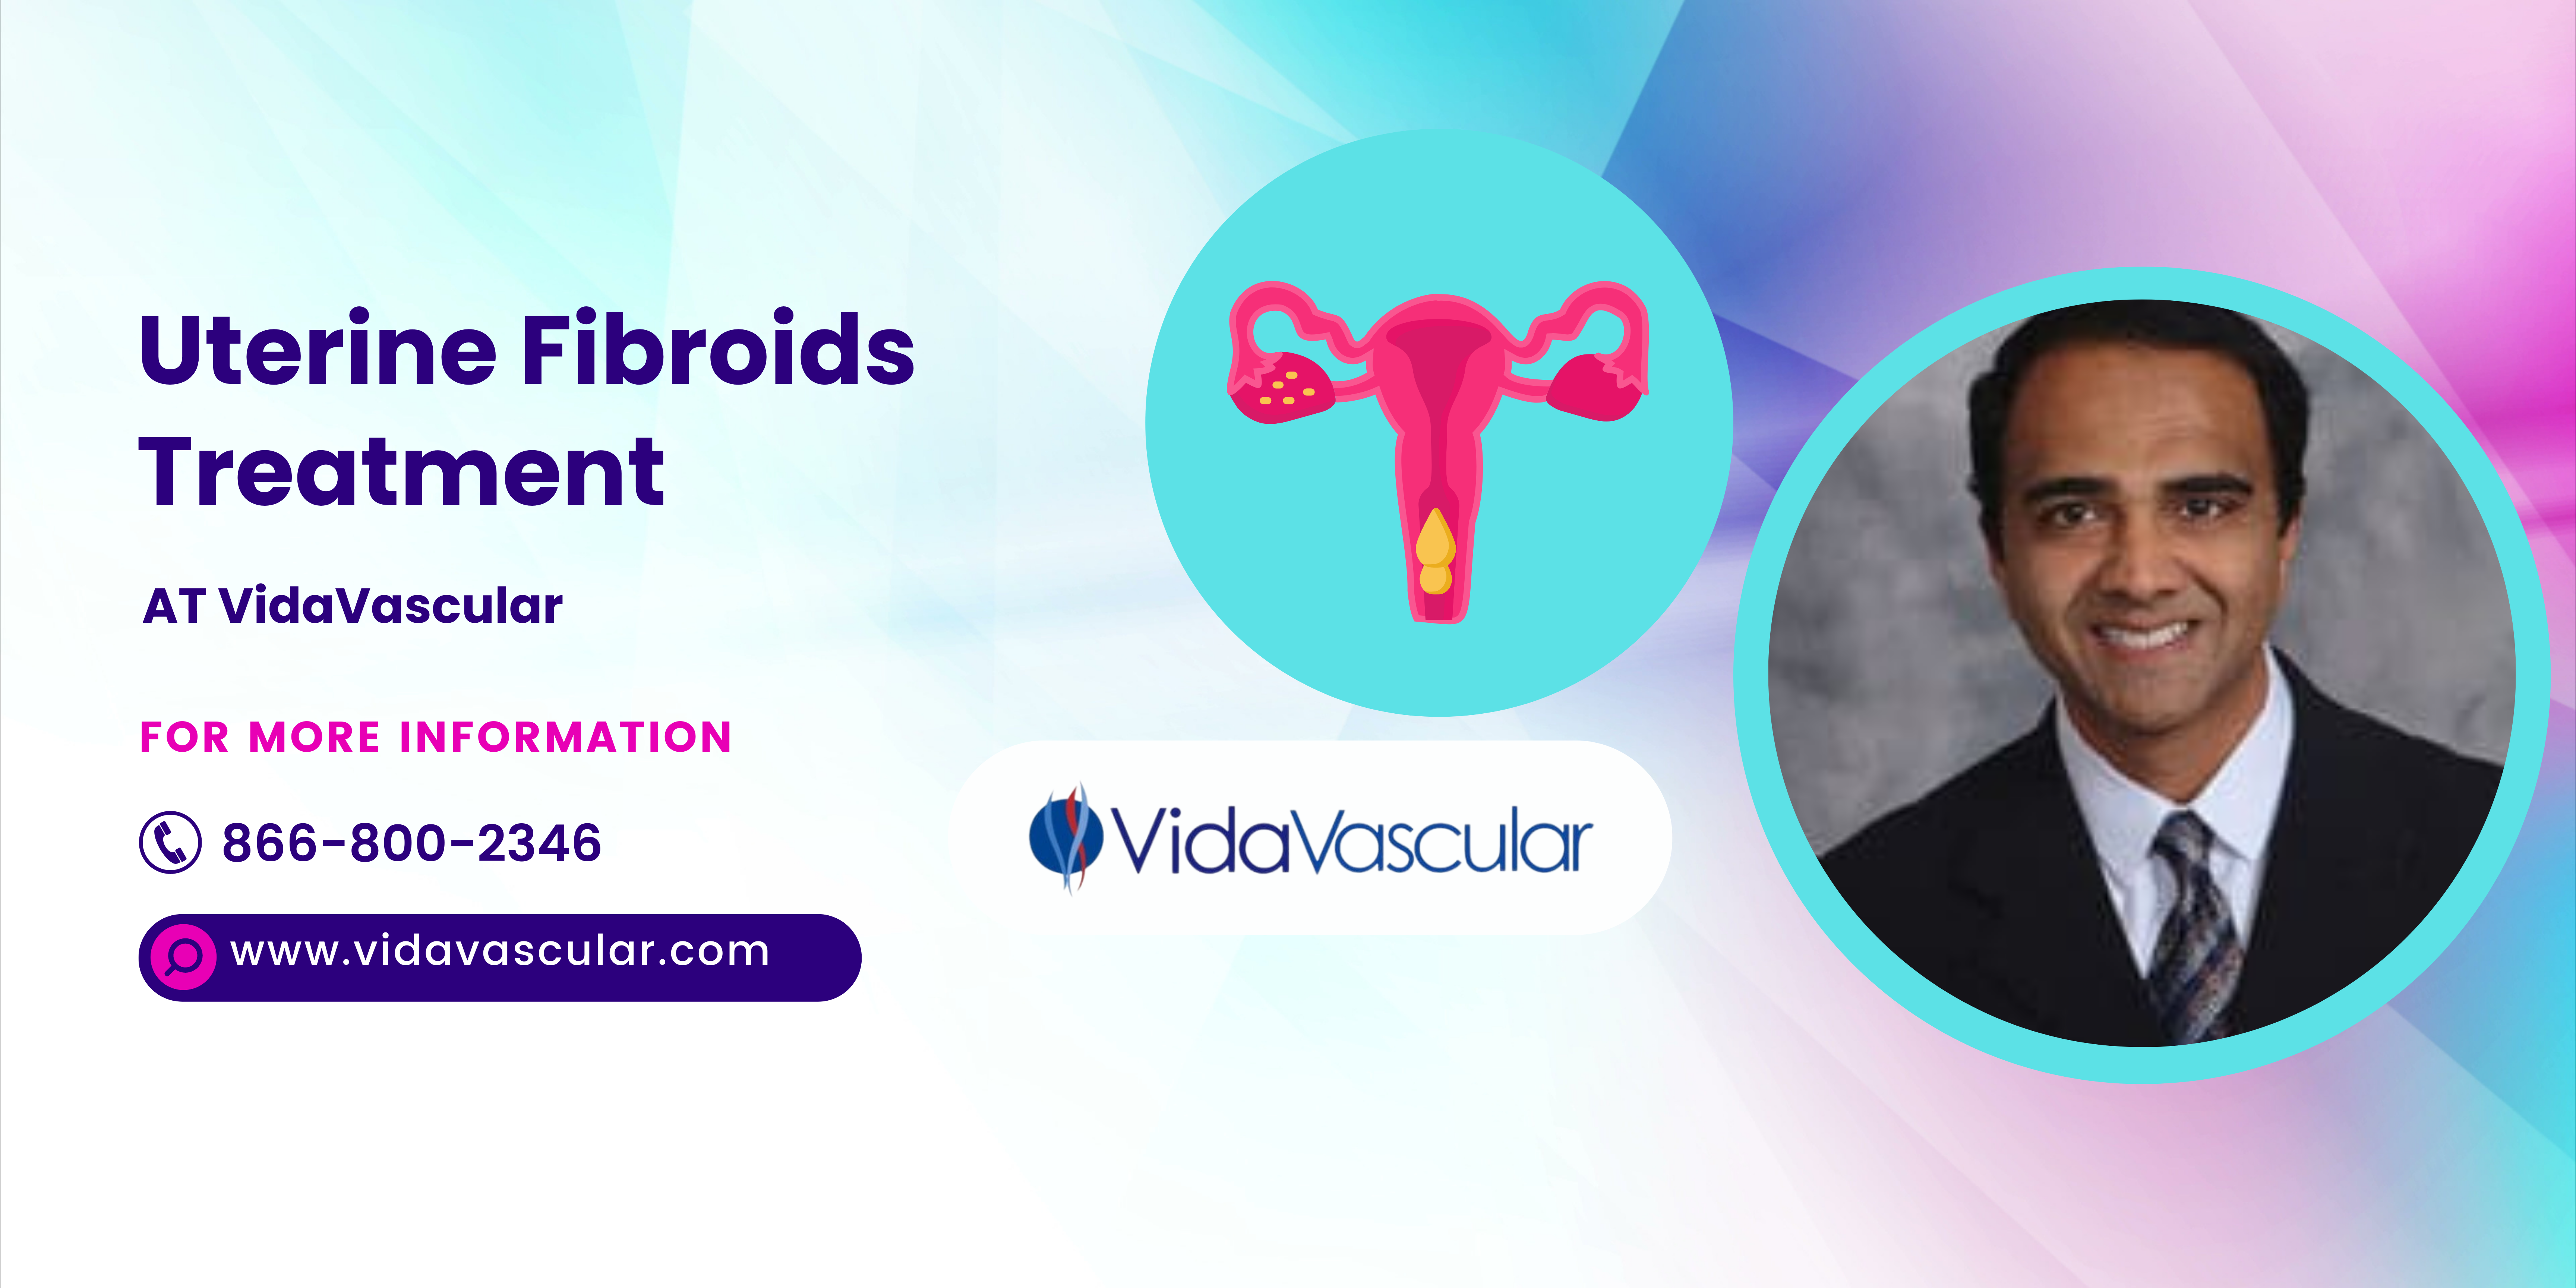 What Are The Risk Factors Of Uterine Fibroids?